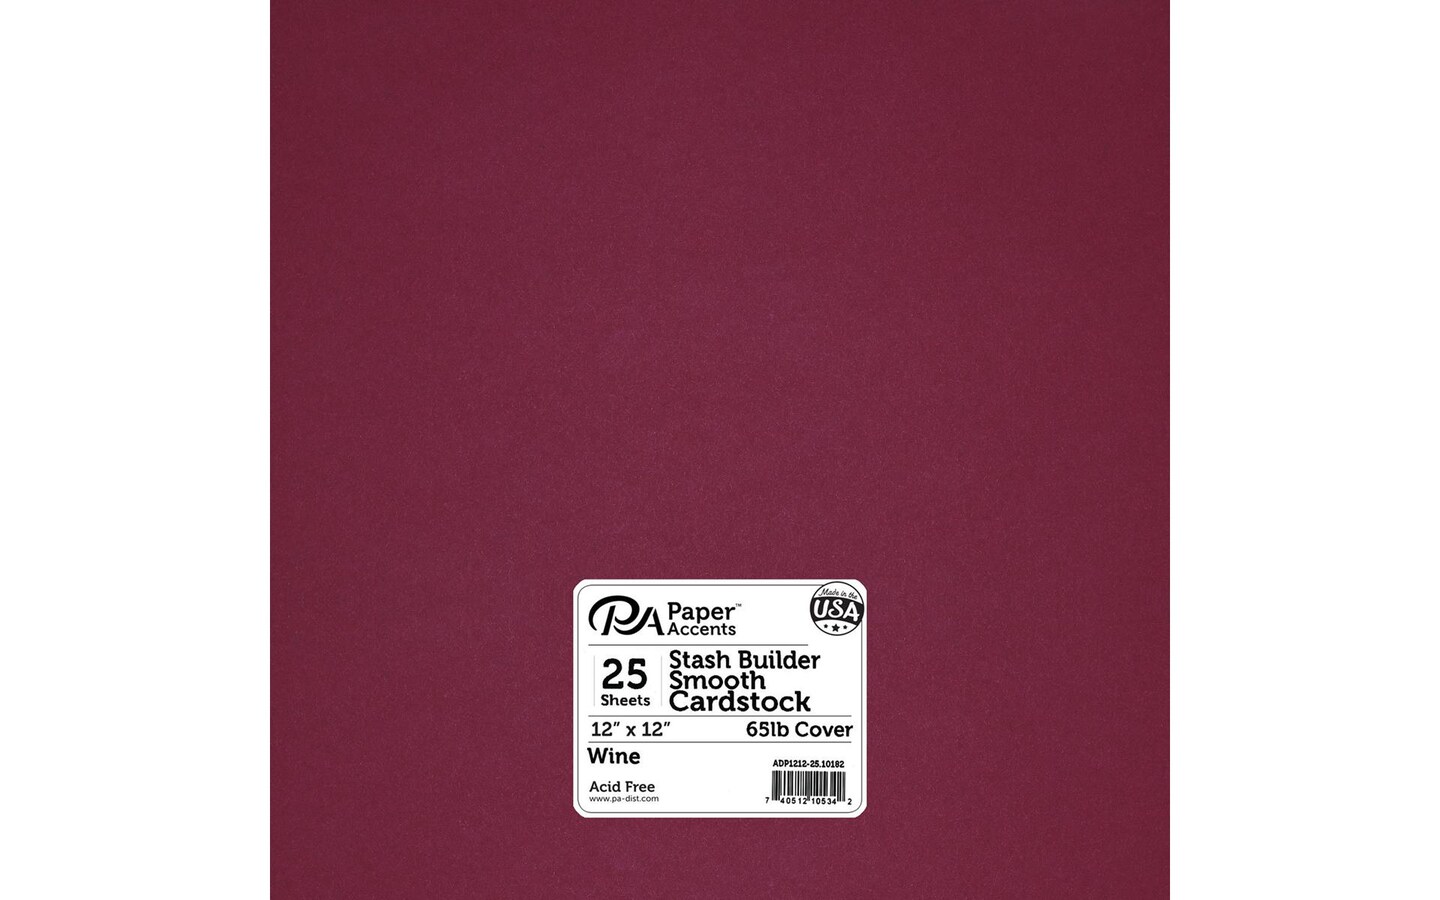 PA Paper™ Accents White Glossy 12 x 12 10pt. Cardstock, 25 Sheets